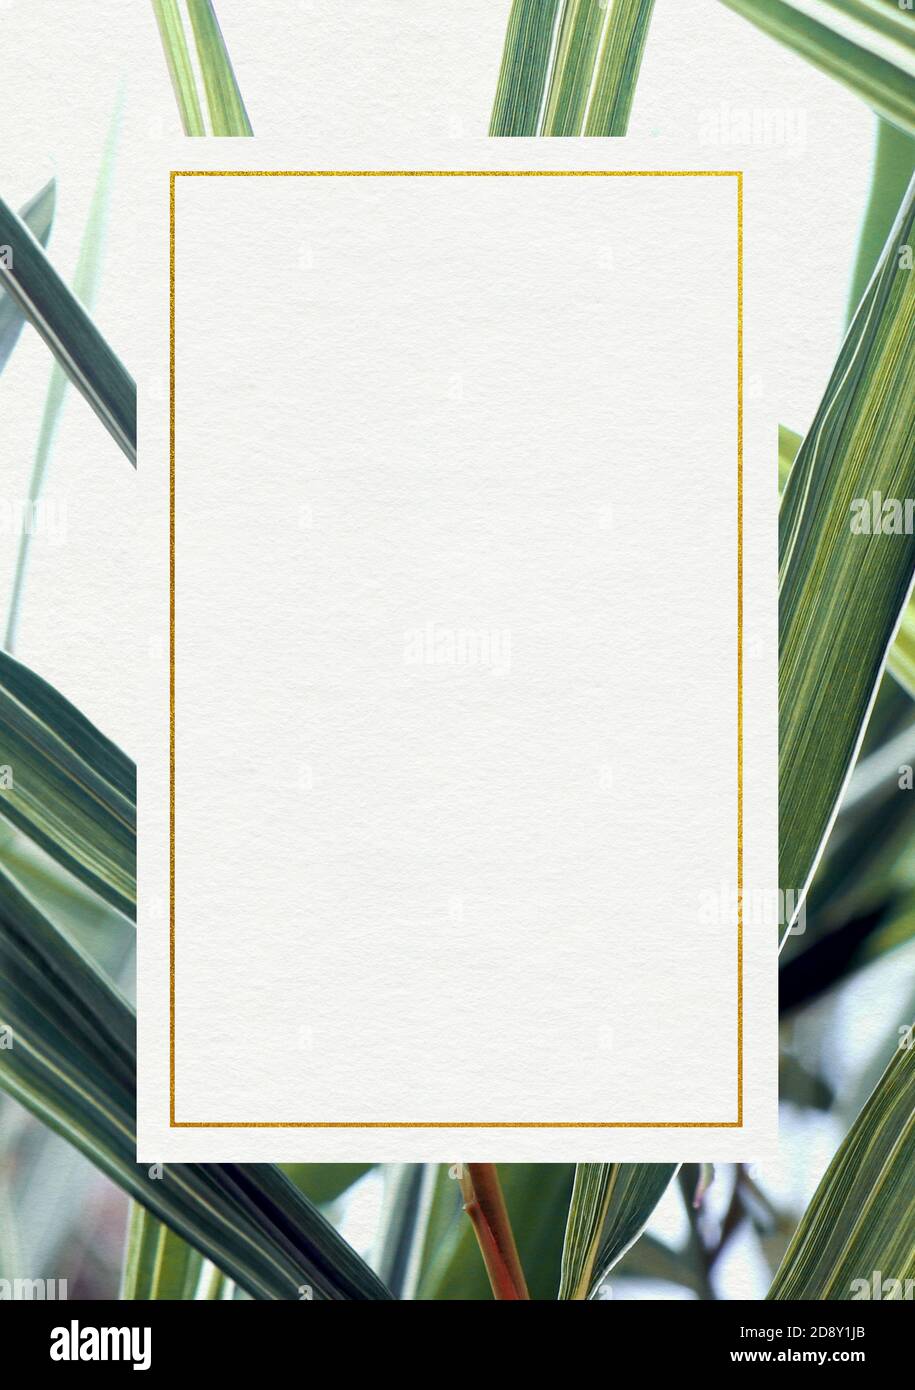 Premium Wedding invitation Template of Bamboo leafs with golden yellow frame. Wedding invitation, thank you card, save the date cards. Wedding invitat Stock Photo